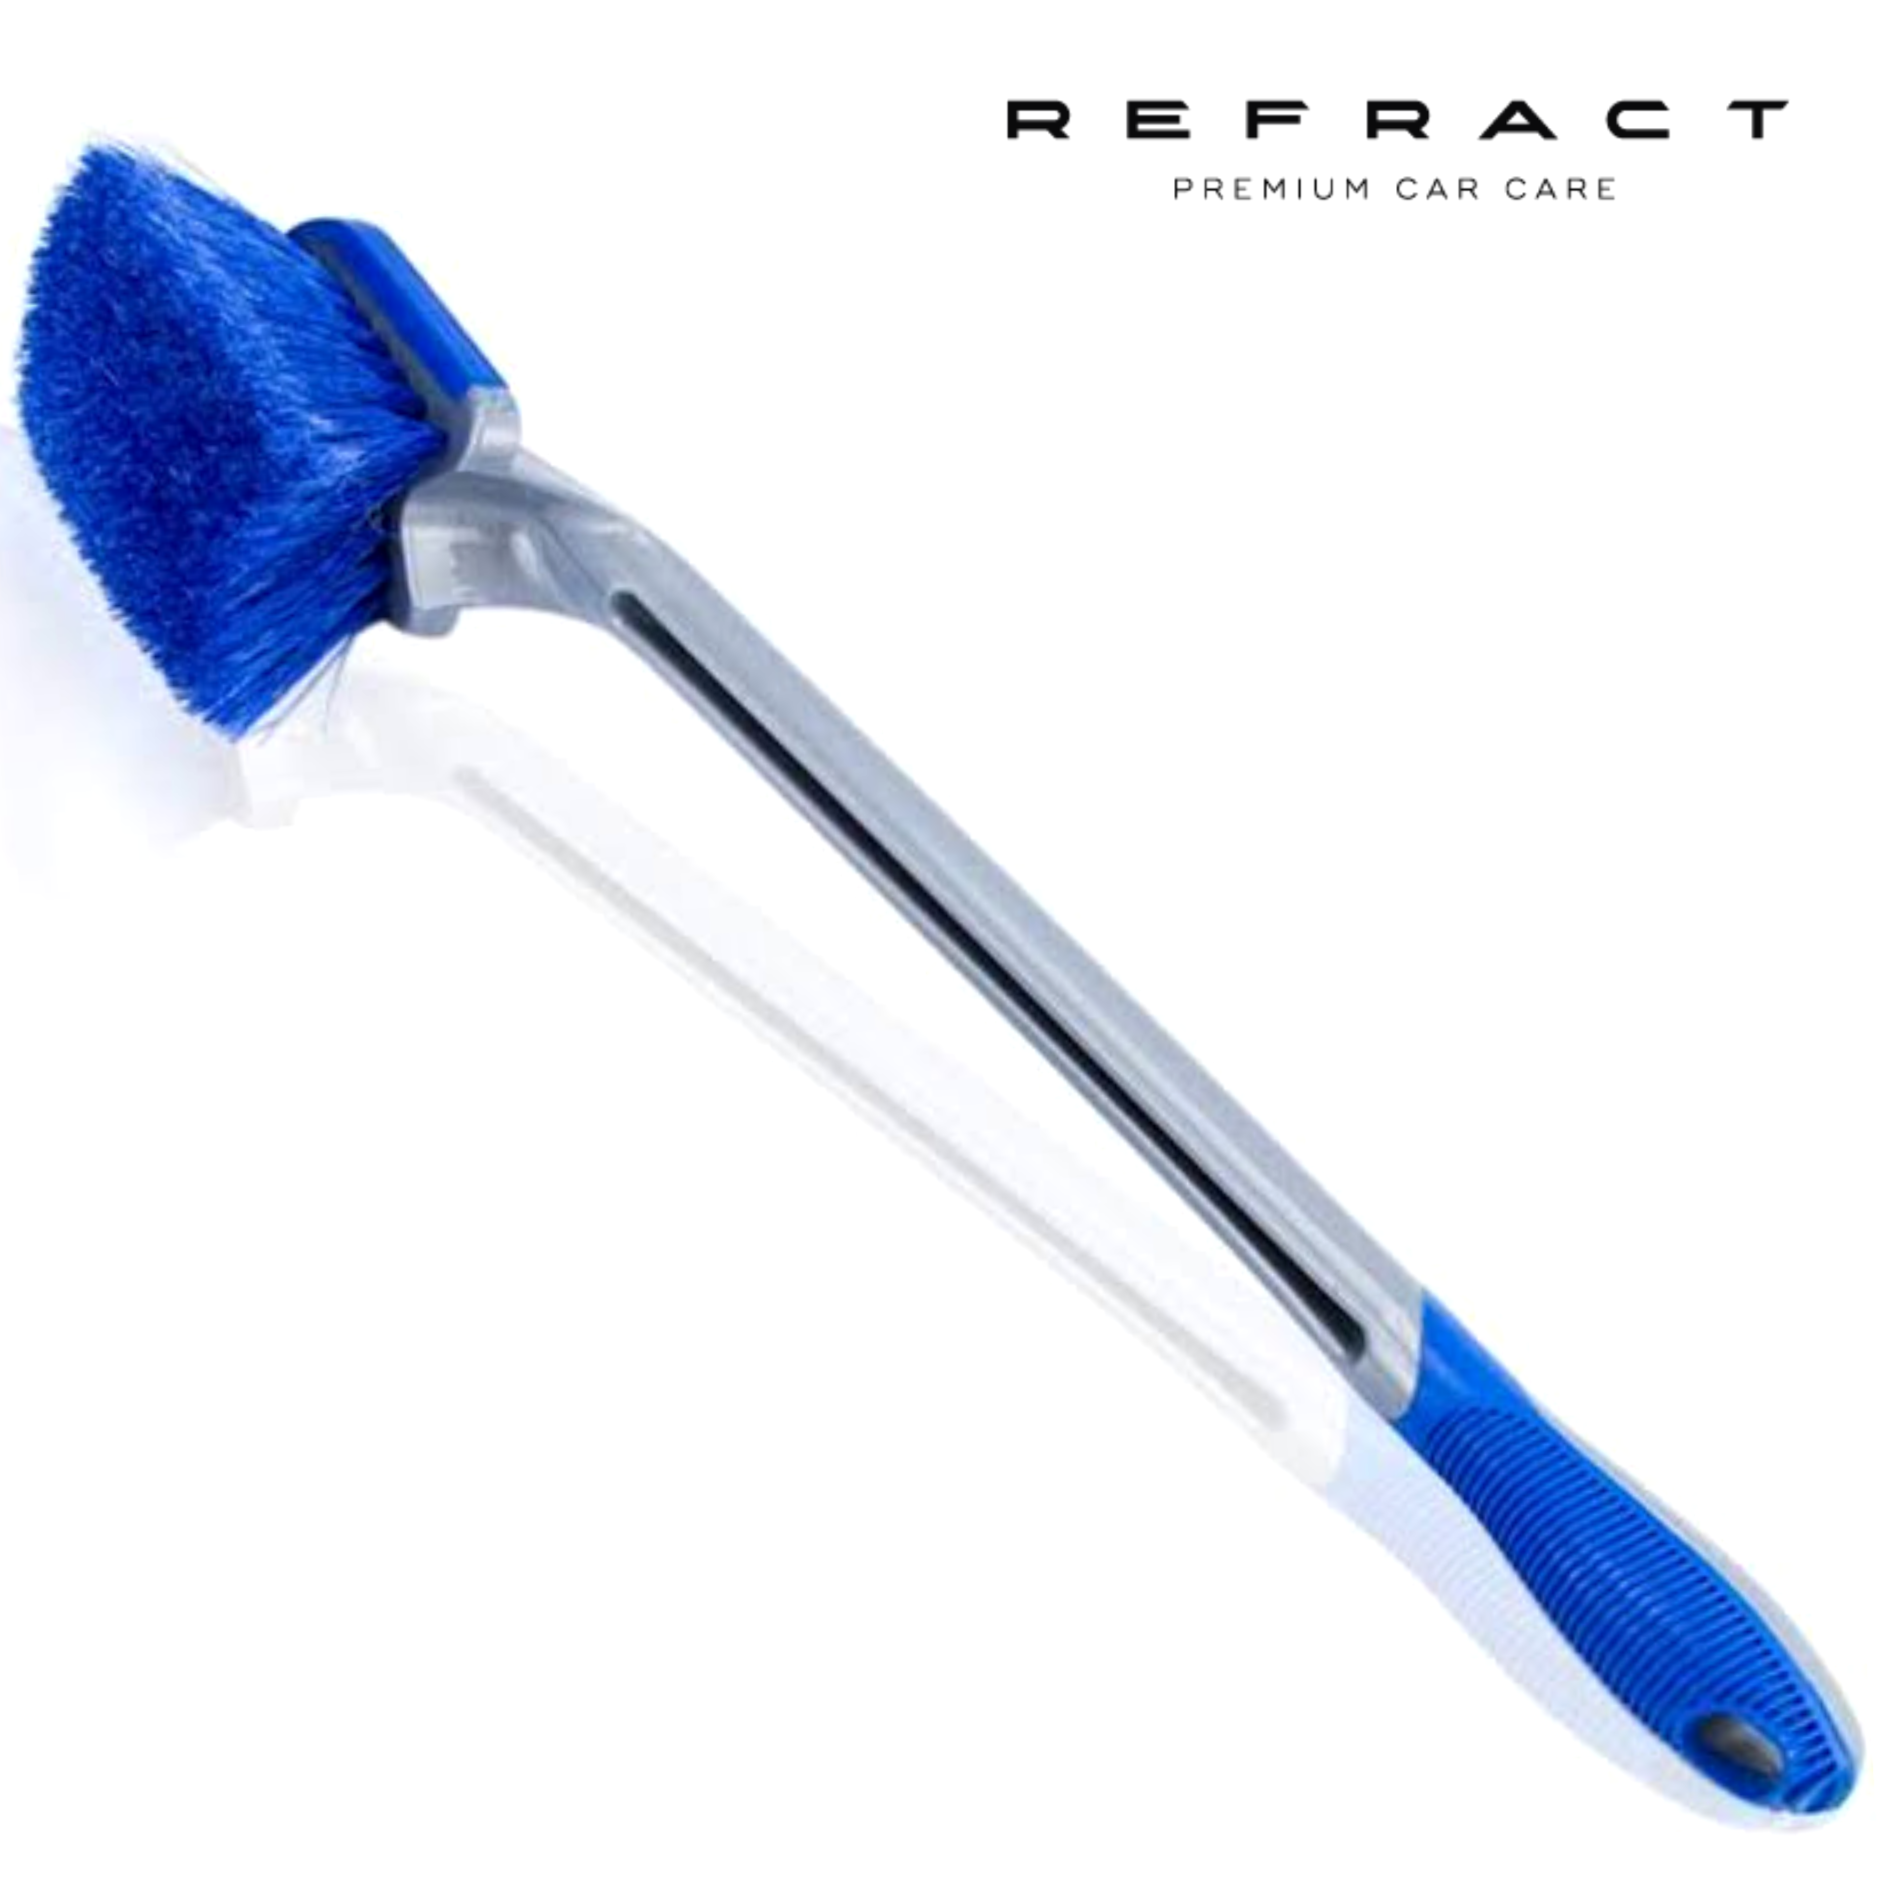 Refract Premium Car Care Products Refract Long Handle Soft Wheel Cleaning Brush $18.95